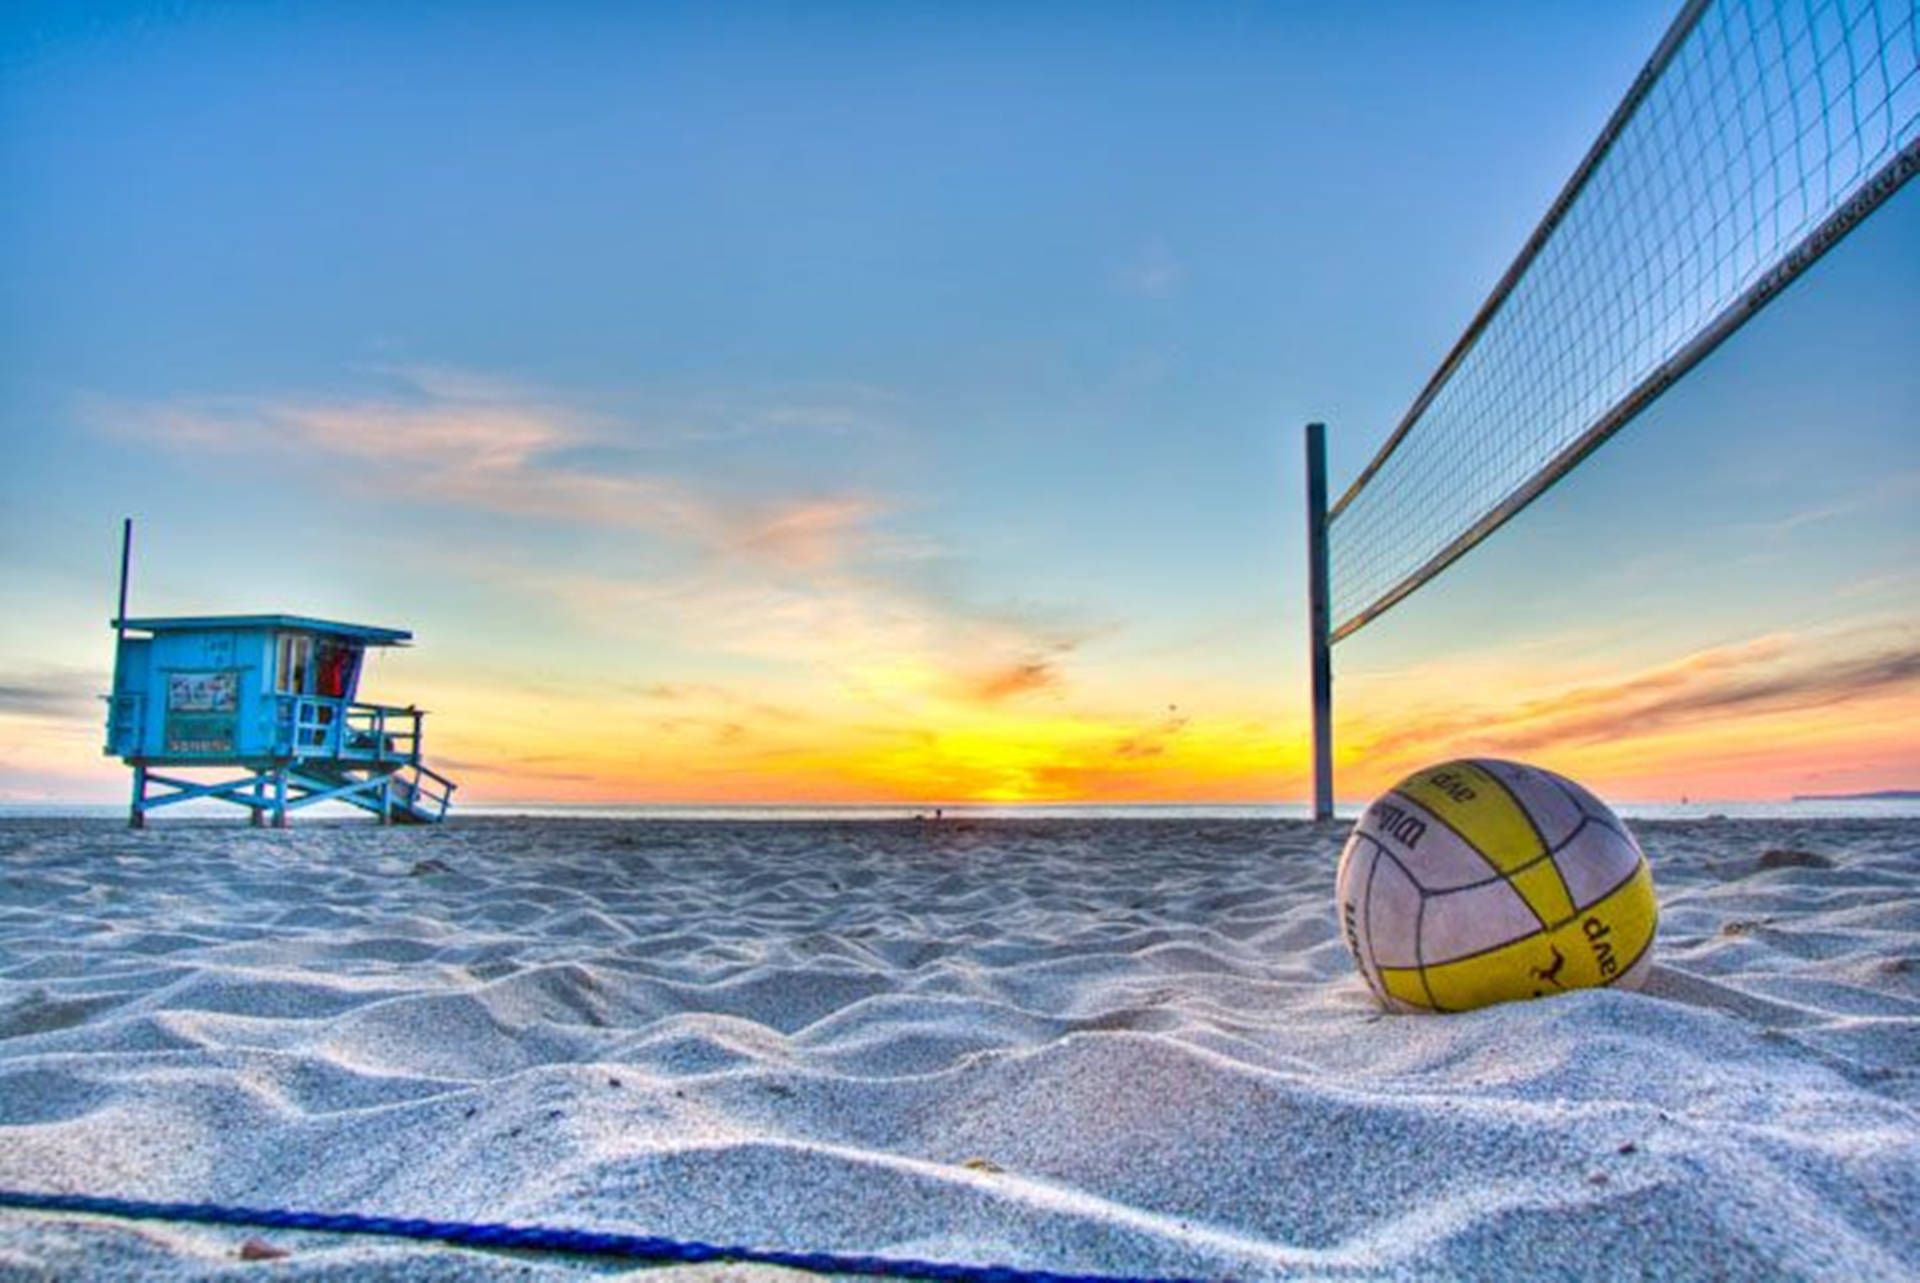 Download Aesthetic Beach Volleyball And Lifeguard Post Wallpaper